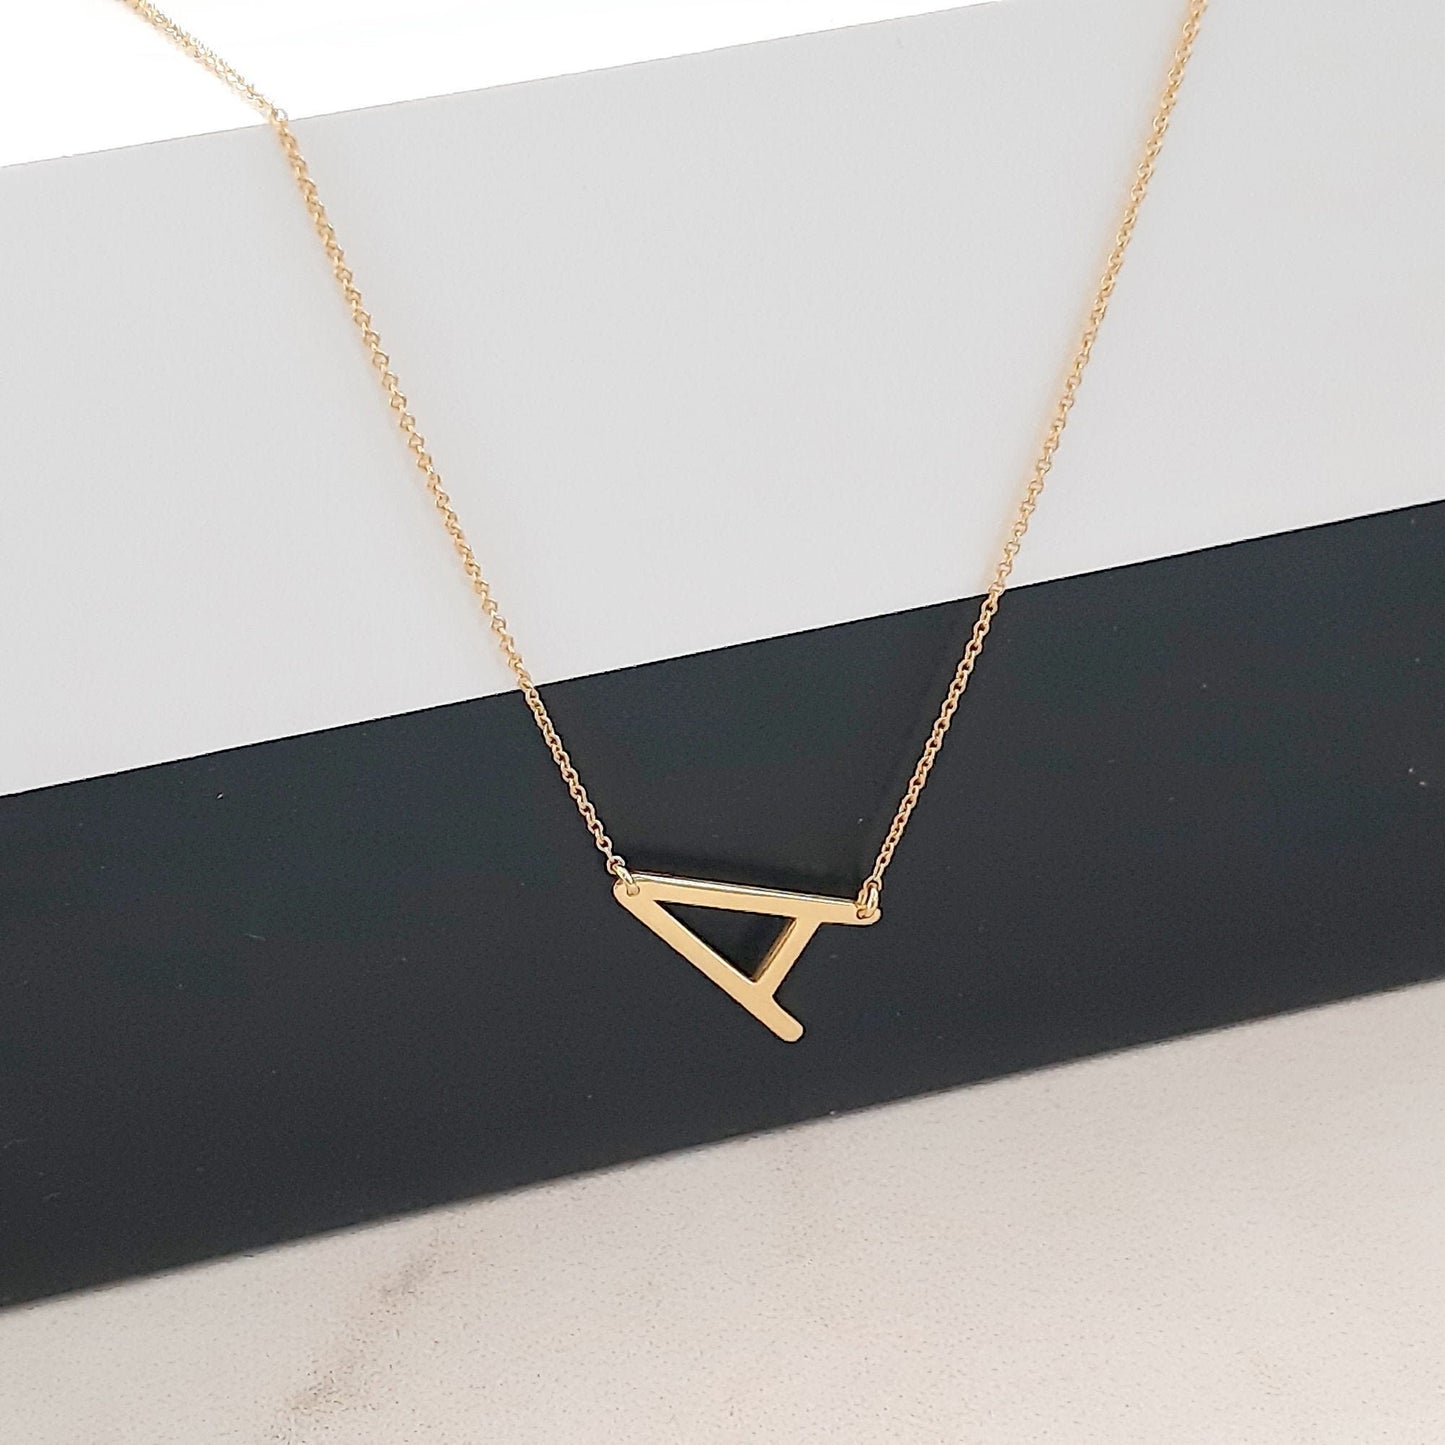 Sideways Initial Necklace, 14k solid gold Icon Necklace, Gold Letter Necklace, Alphabet Necklace, Gift to Her, Birthday, layered necklace